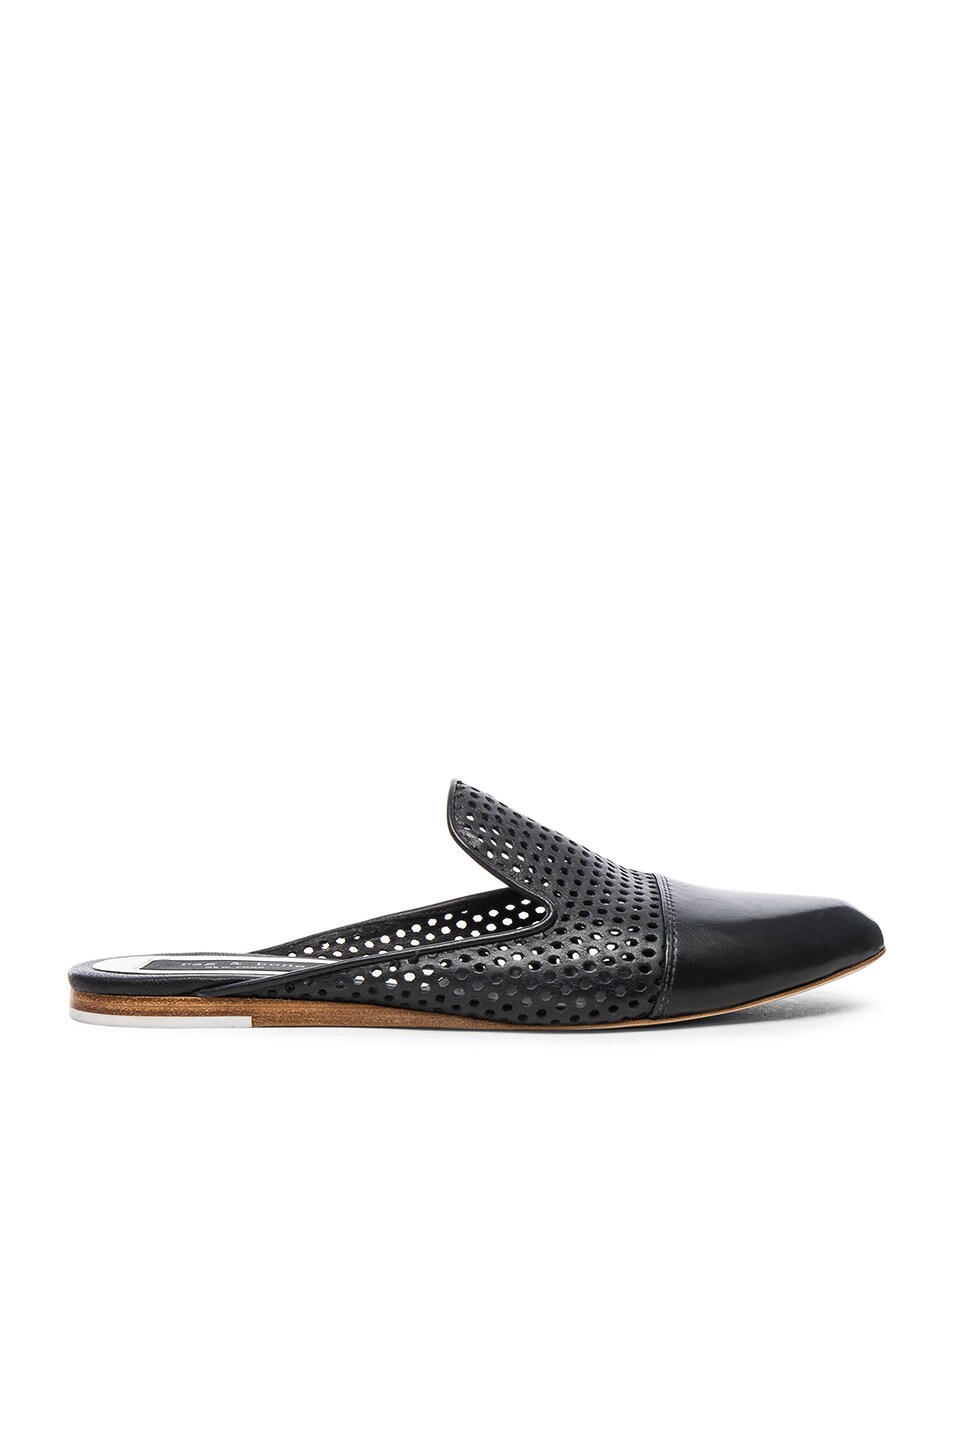 Image 1 of Rag & Bone Leather Sabine Loafers in Black Perforated